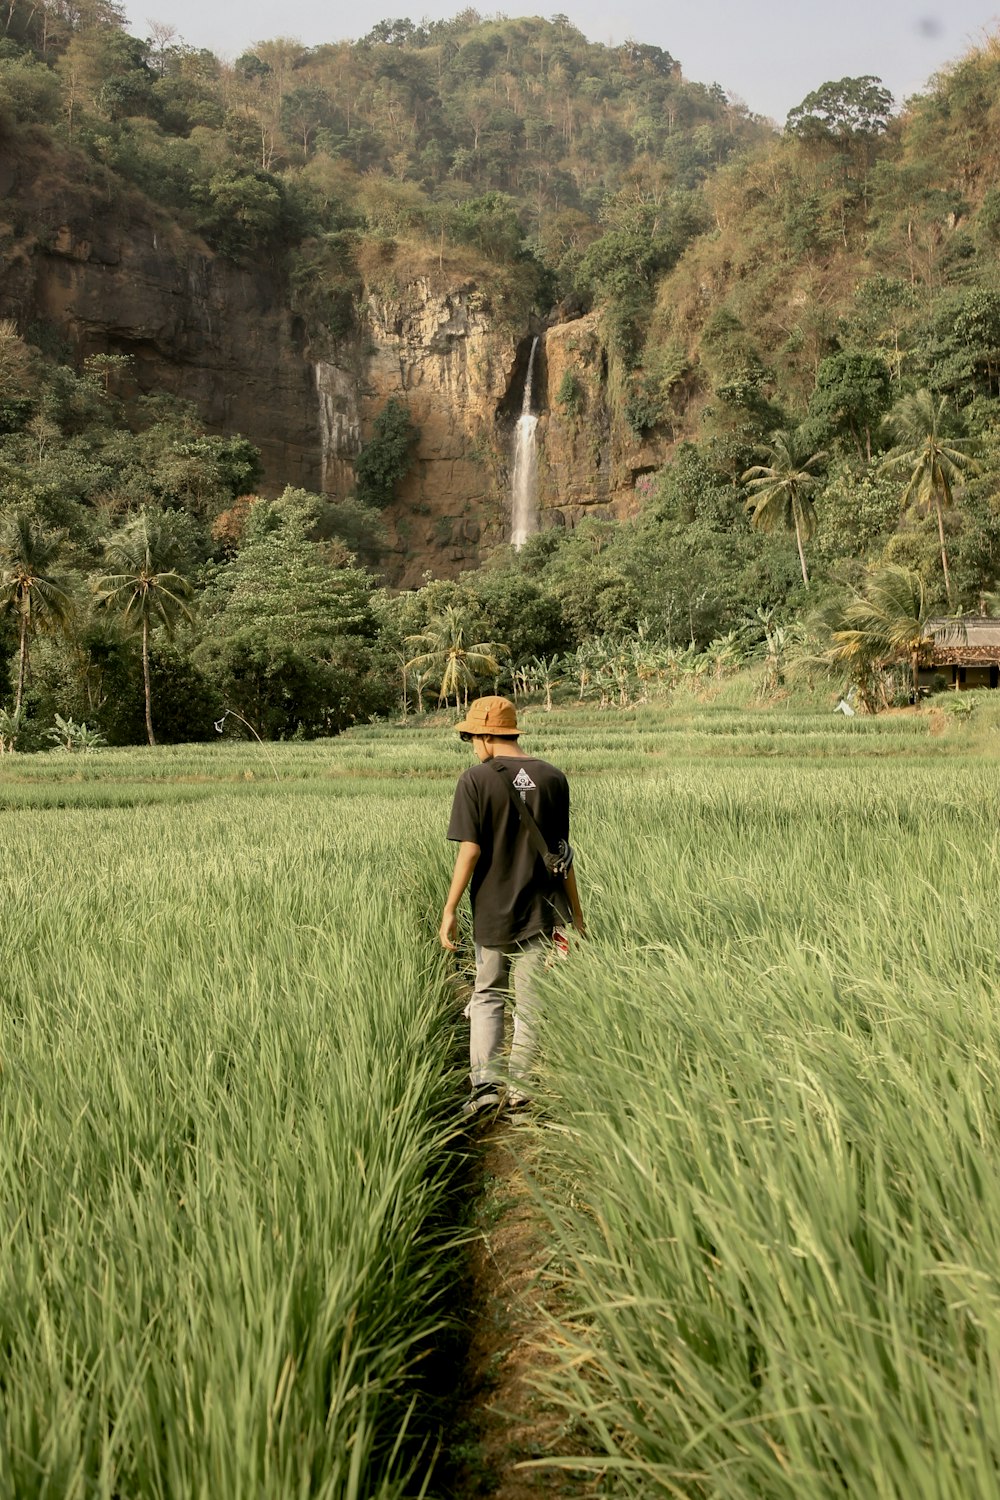 a person walking through a field of grass with a tall waterfall in the background